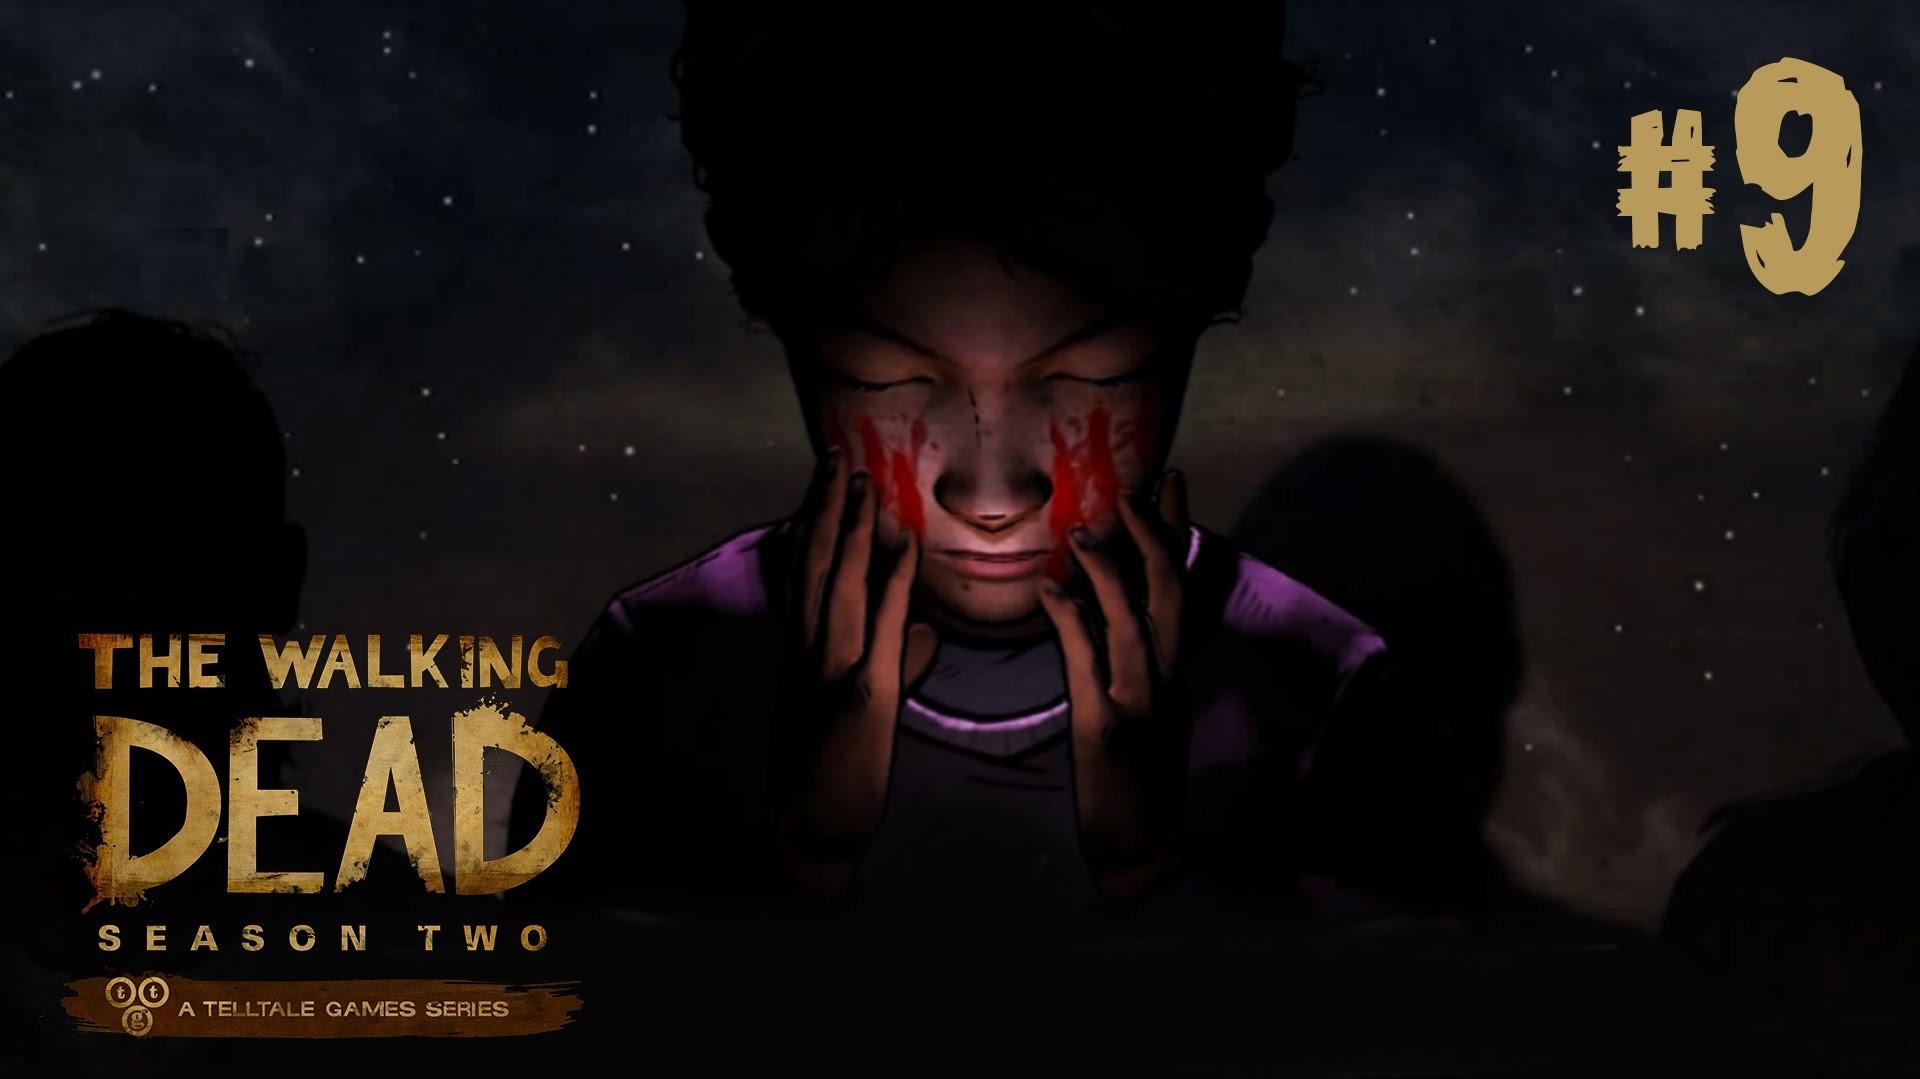 THE BLOOD IS ON MY HANDS The Walking Dead Season 2 Ep4 Part 1